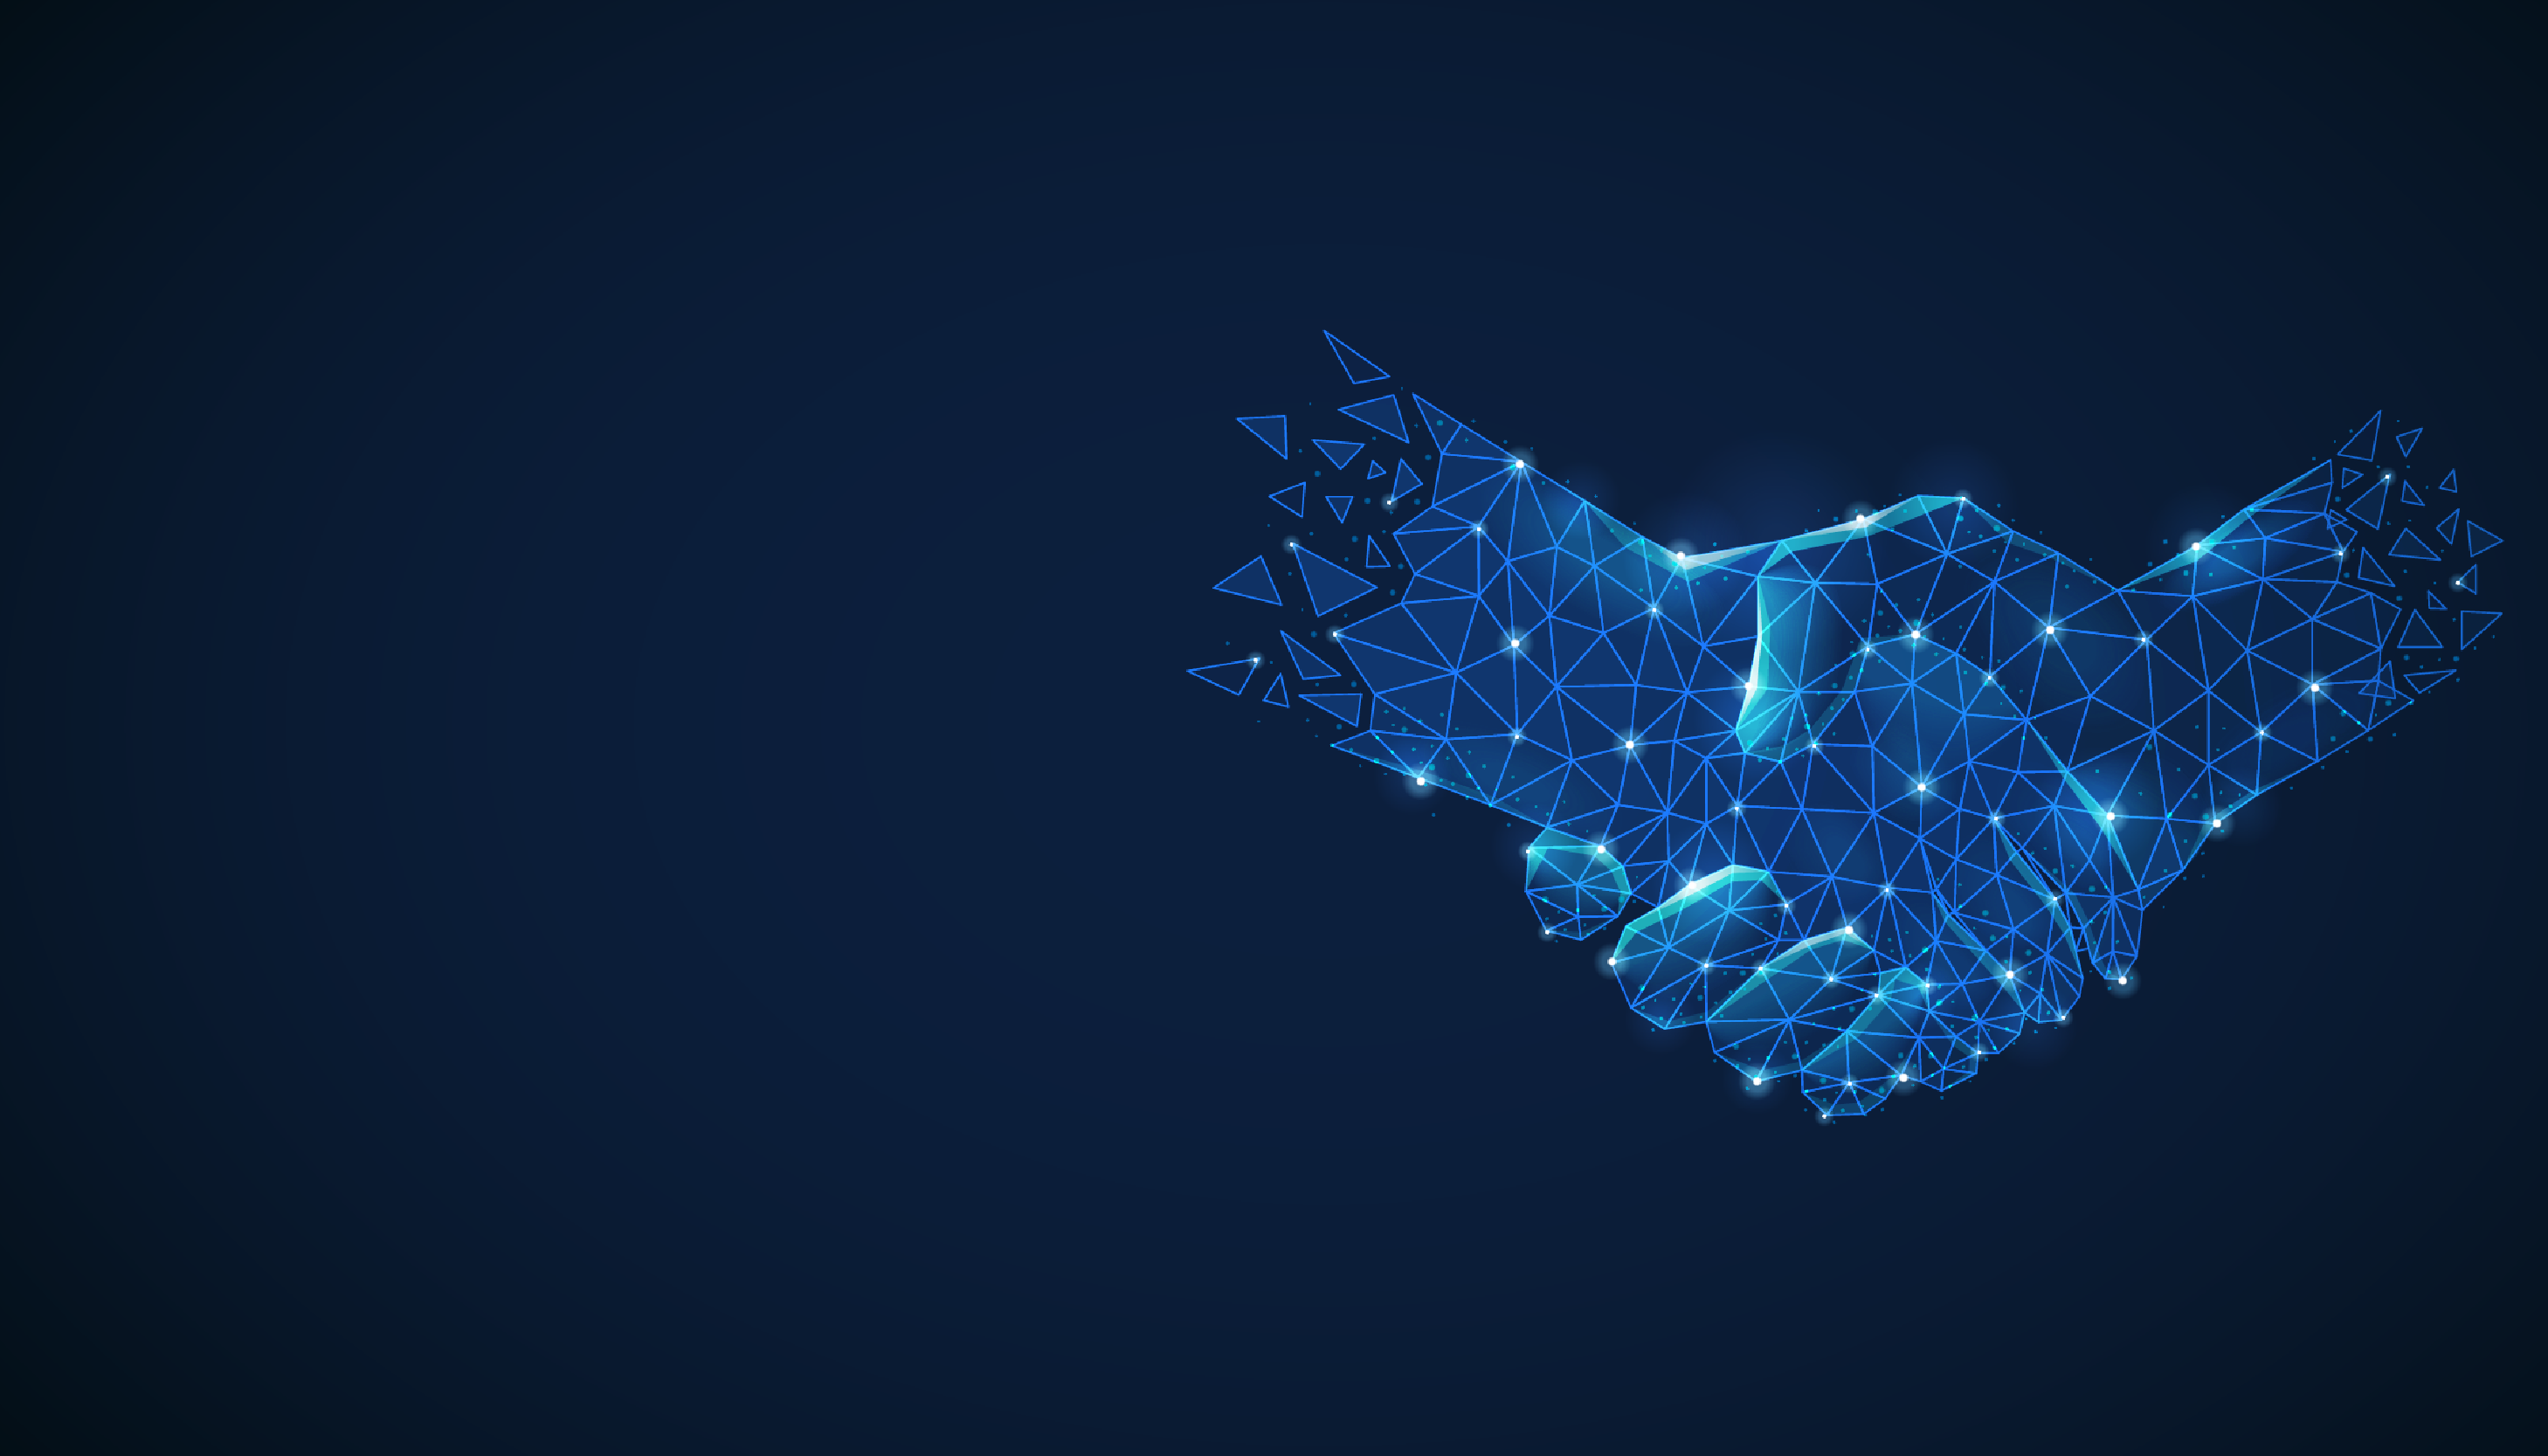 Low poly illustration depicting a handshake in the context of RPA and robotic process automation.